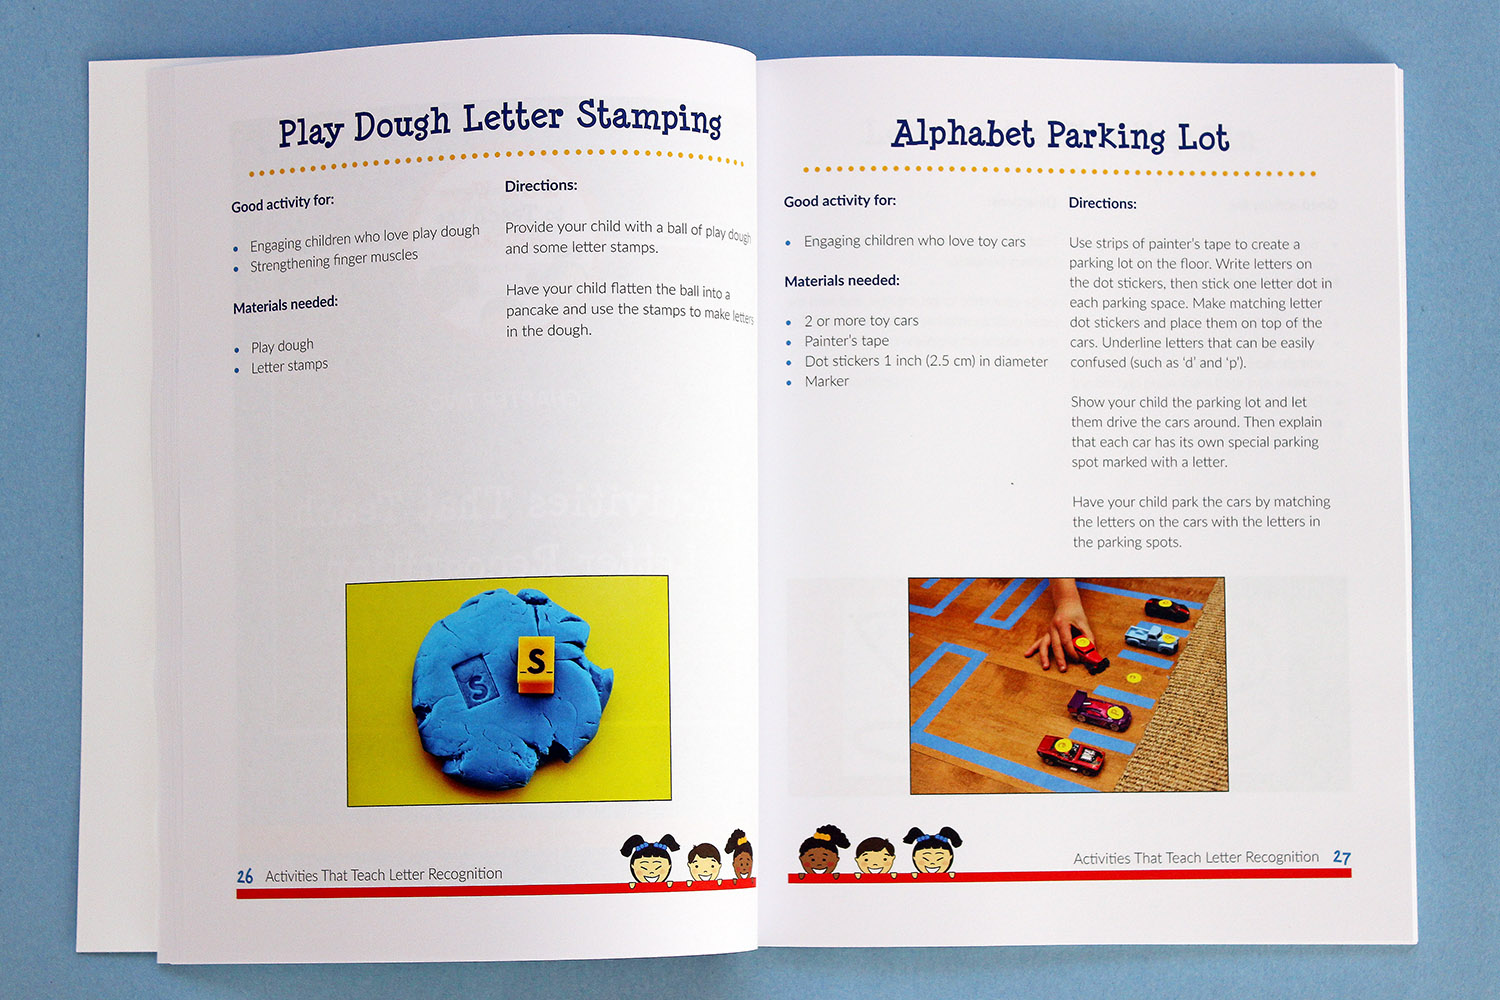 101 Ways to Teach the Alphabet: A Hands-On Approach to Teaching Letters and Sounds Through Play | 101 playful, hands-on, and multi-sensory activities for teaching letters and sounds | More than 800 pages of printable alphabet materials | Answers to your most burning questions about teaching the alphabet | Tips for dealing with common letter learning challenges || Gift of Curiosity